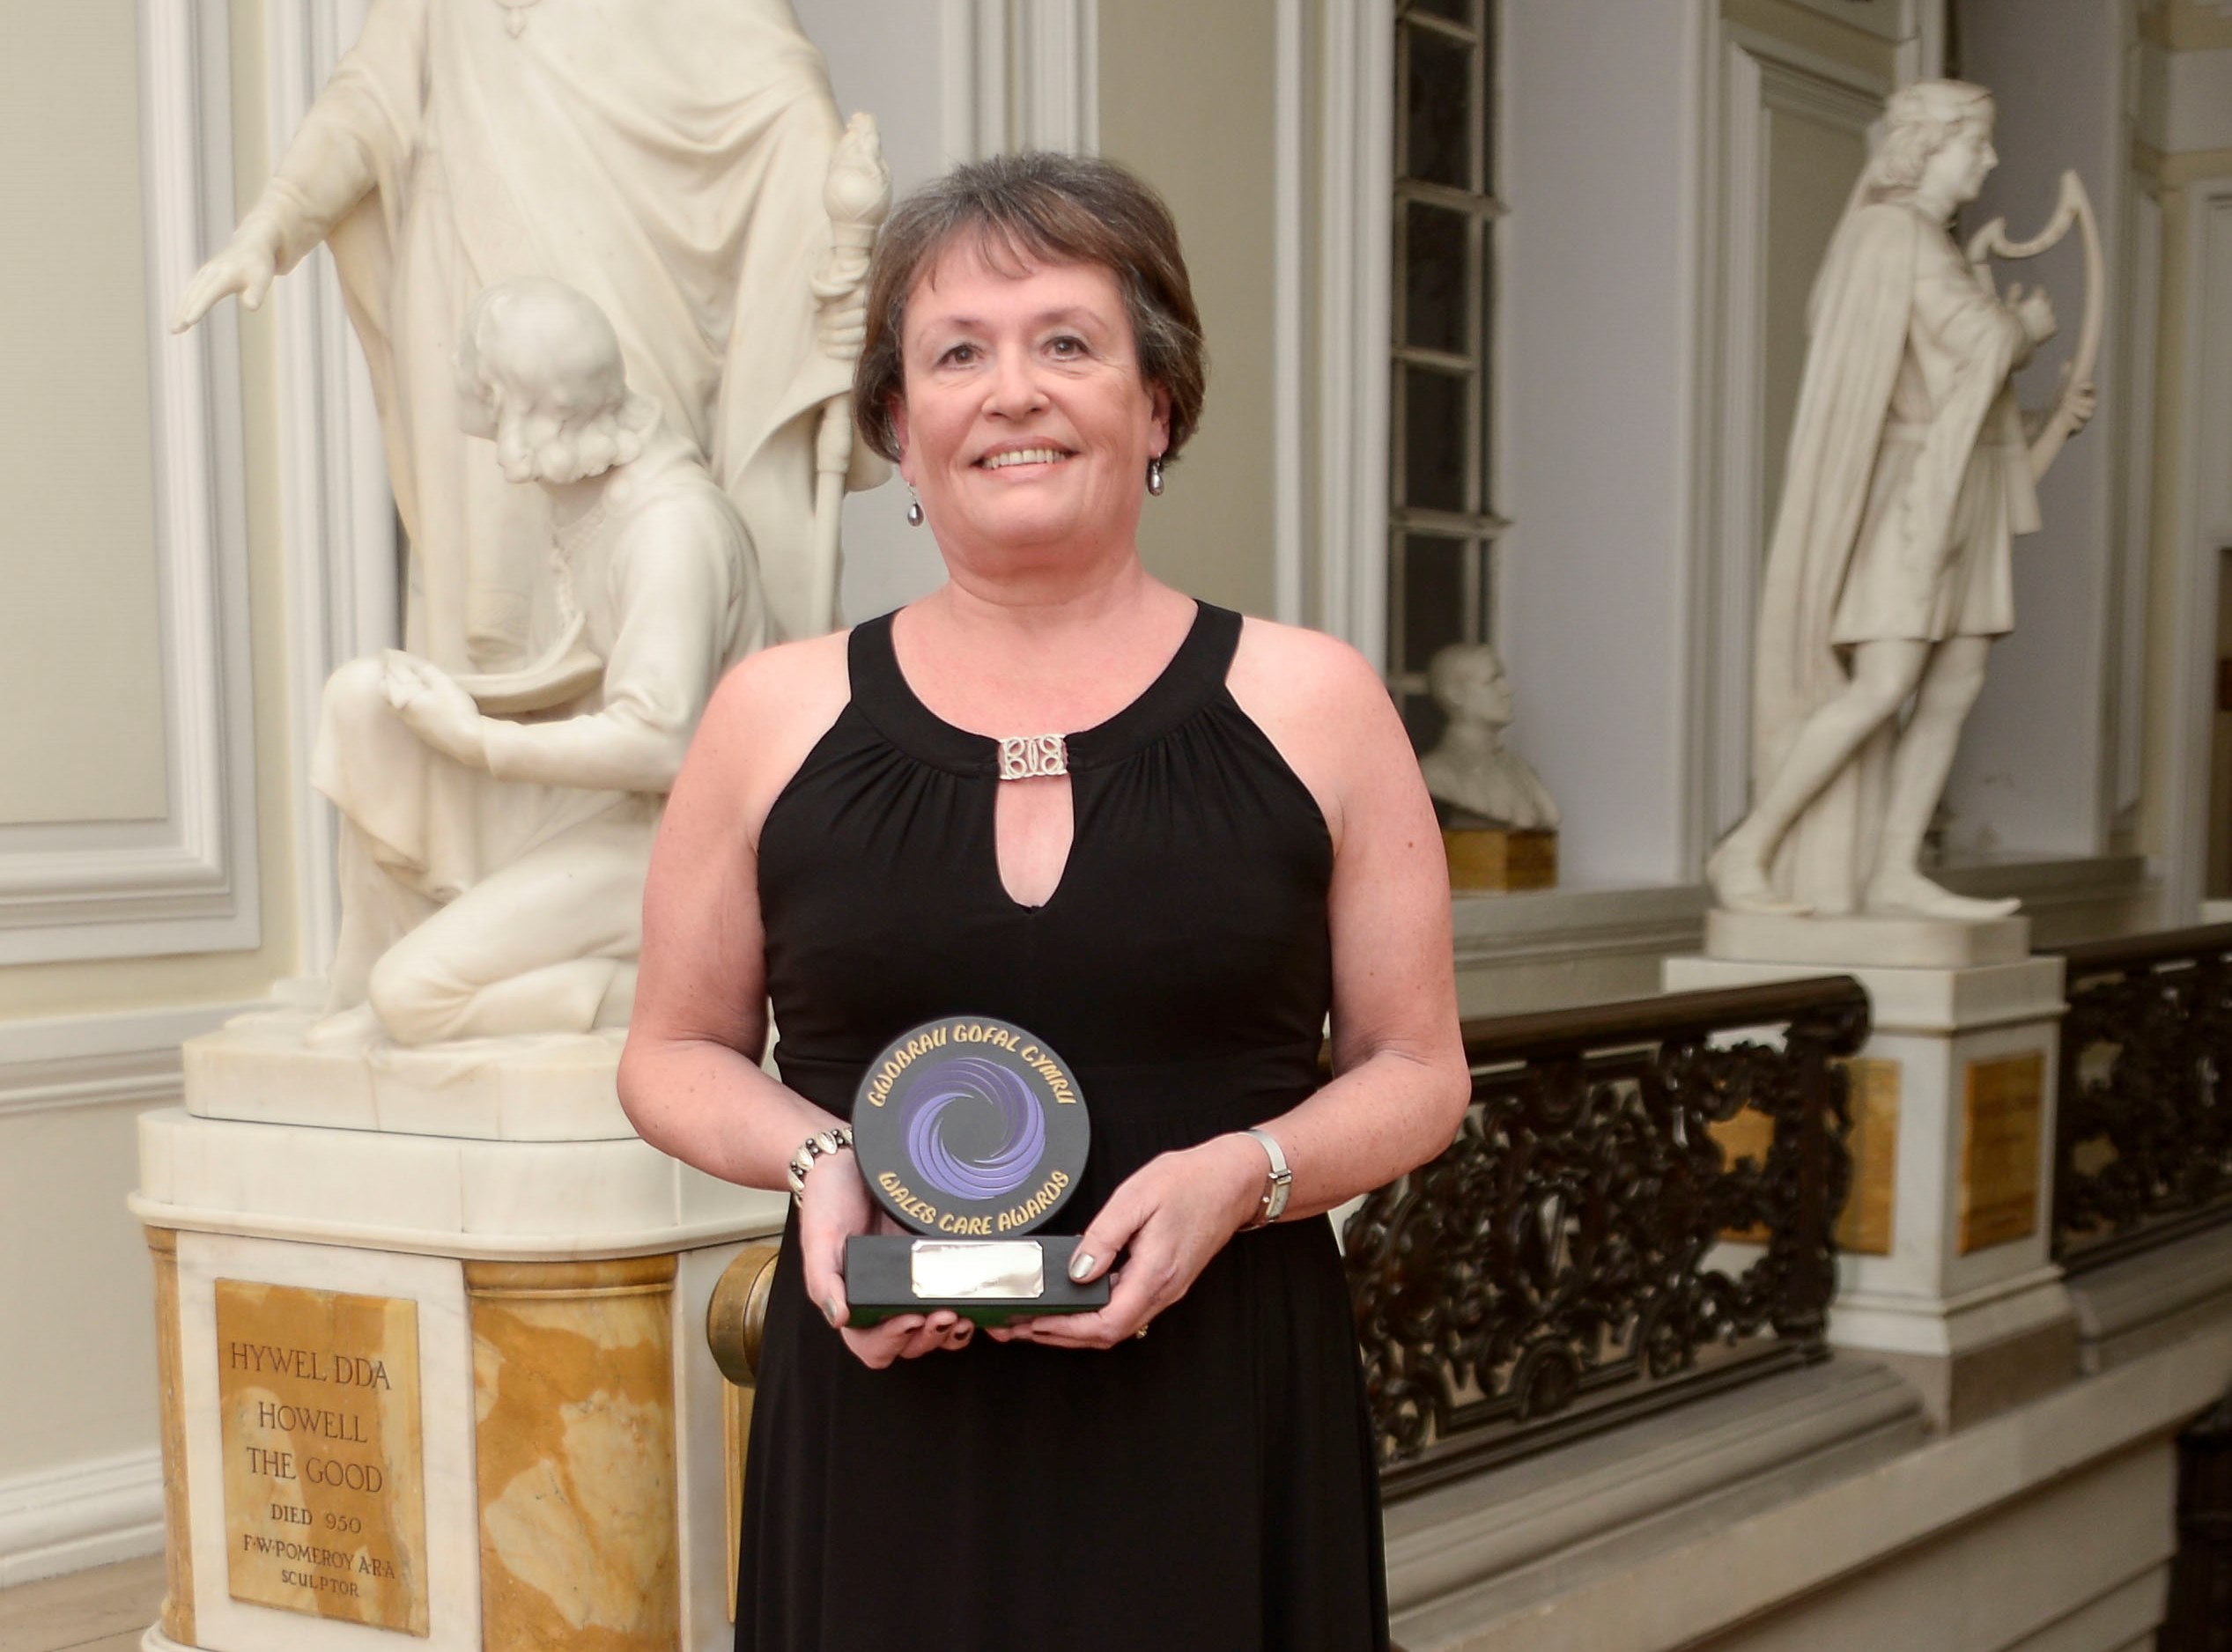 St Asaph family support worker honoured at care awards